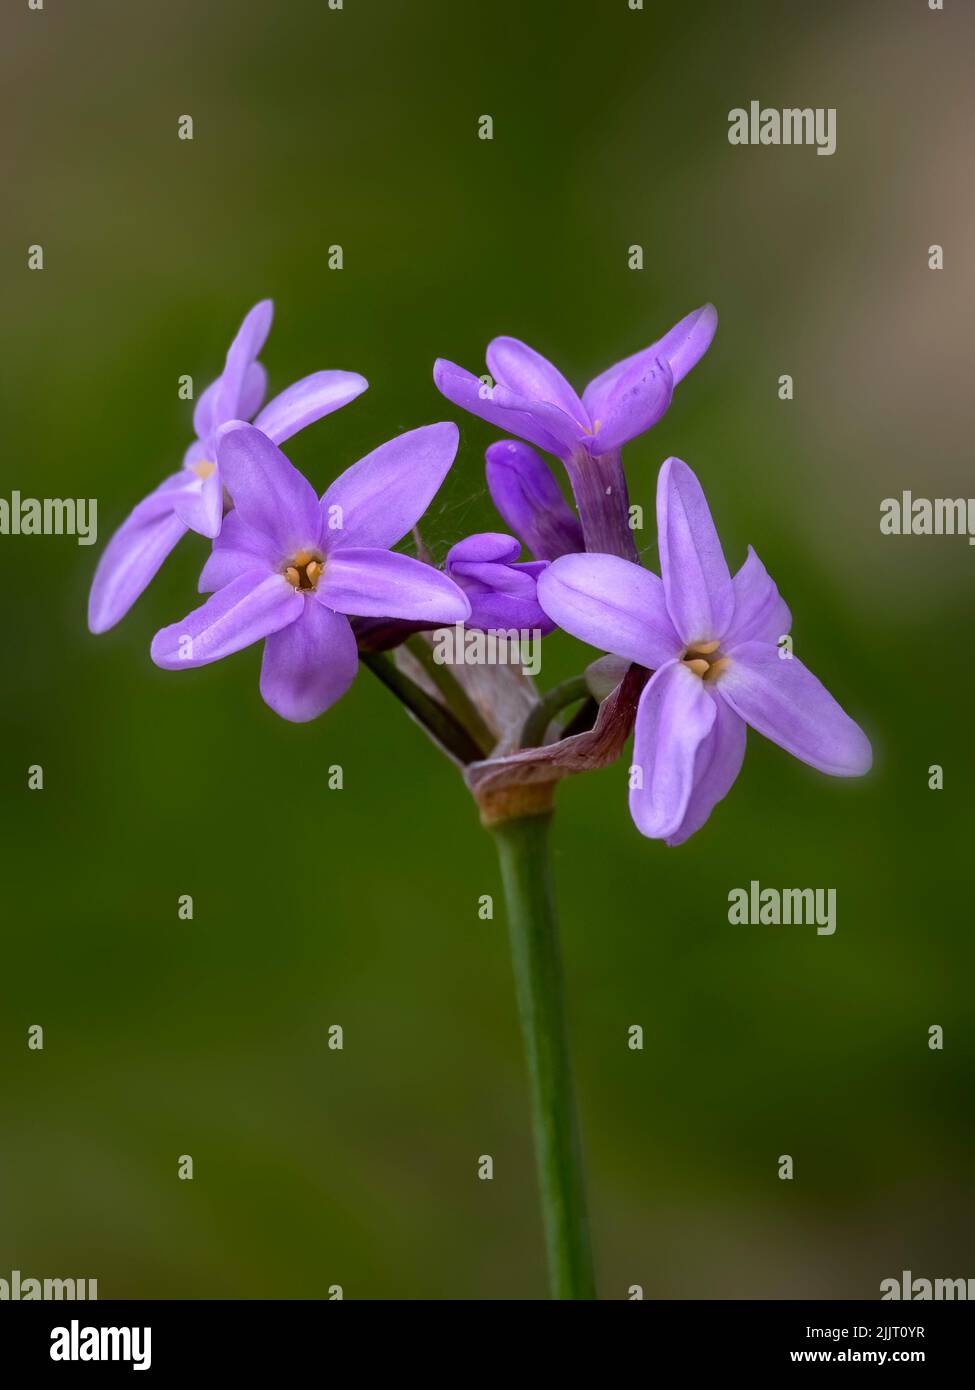 Closeup of flowers of society garlic (Tulbaghia violacea) in a garden in summer Stock Photo